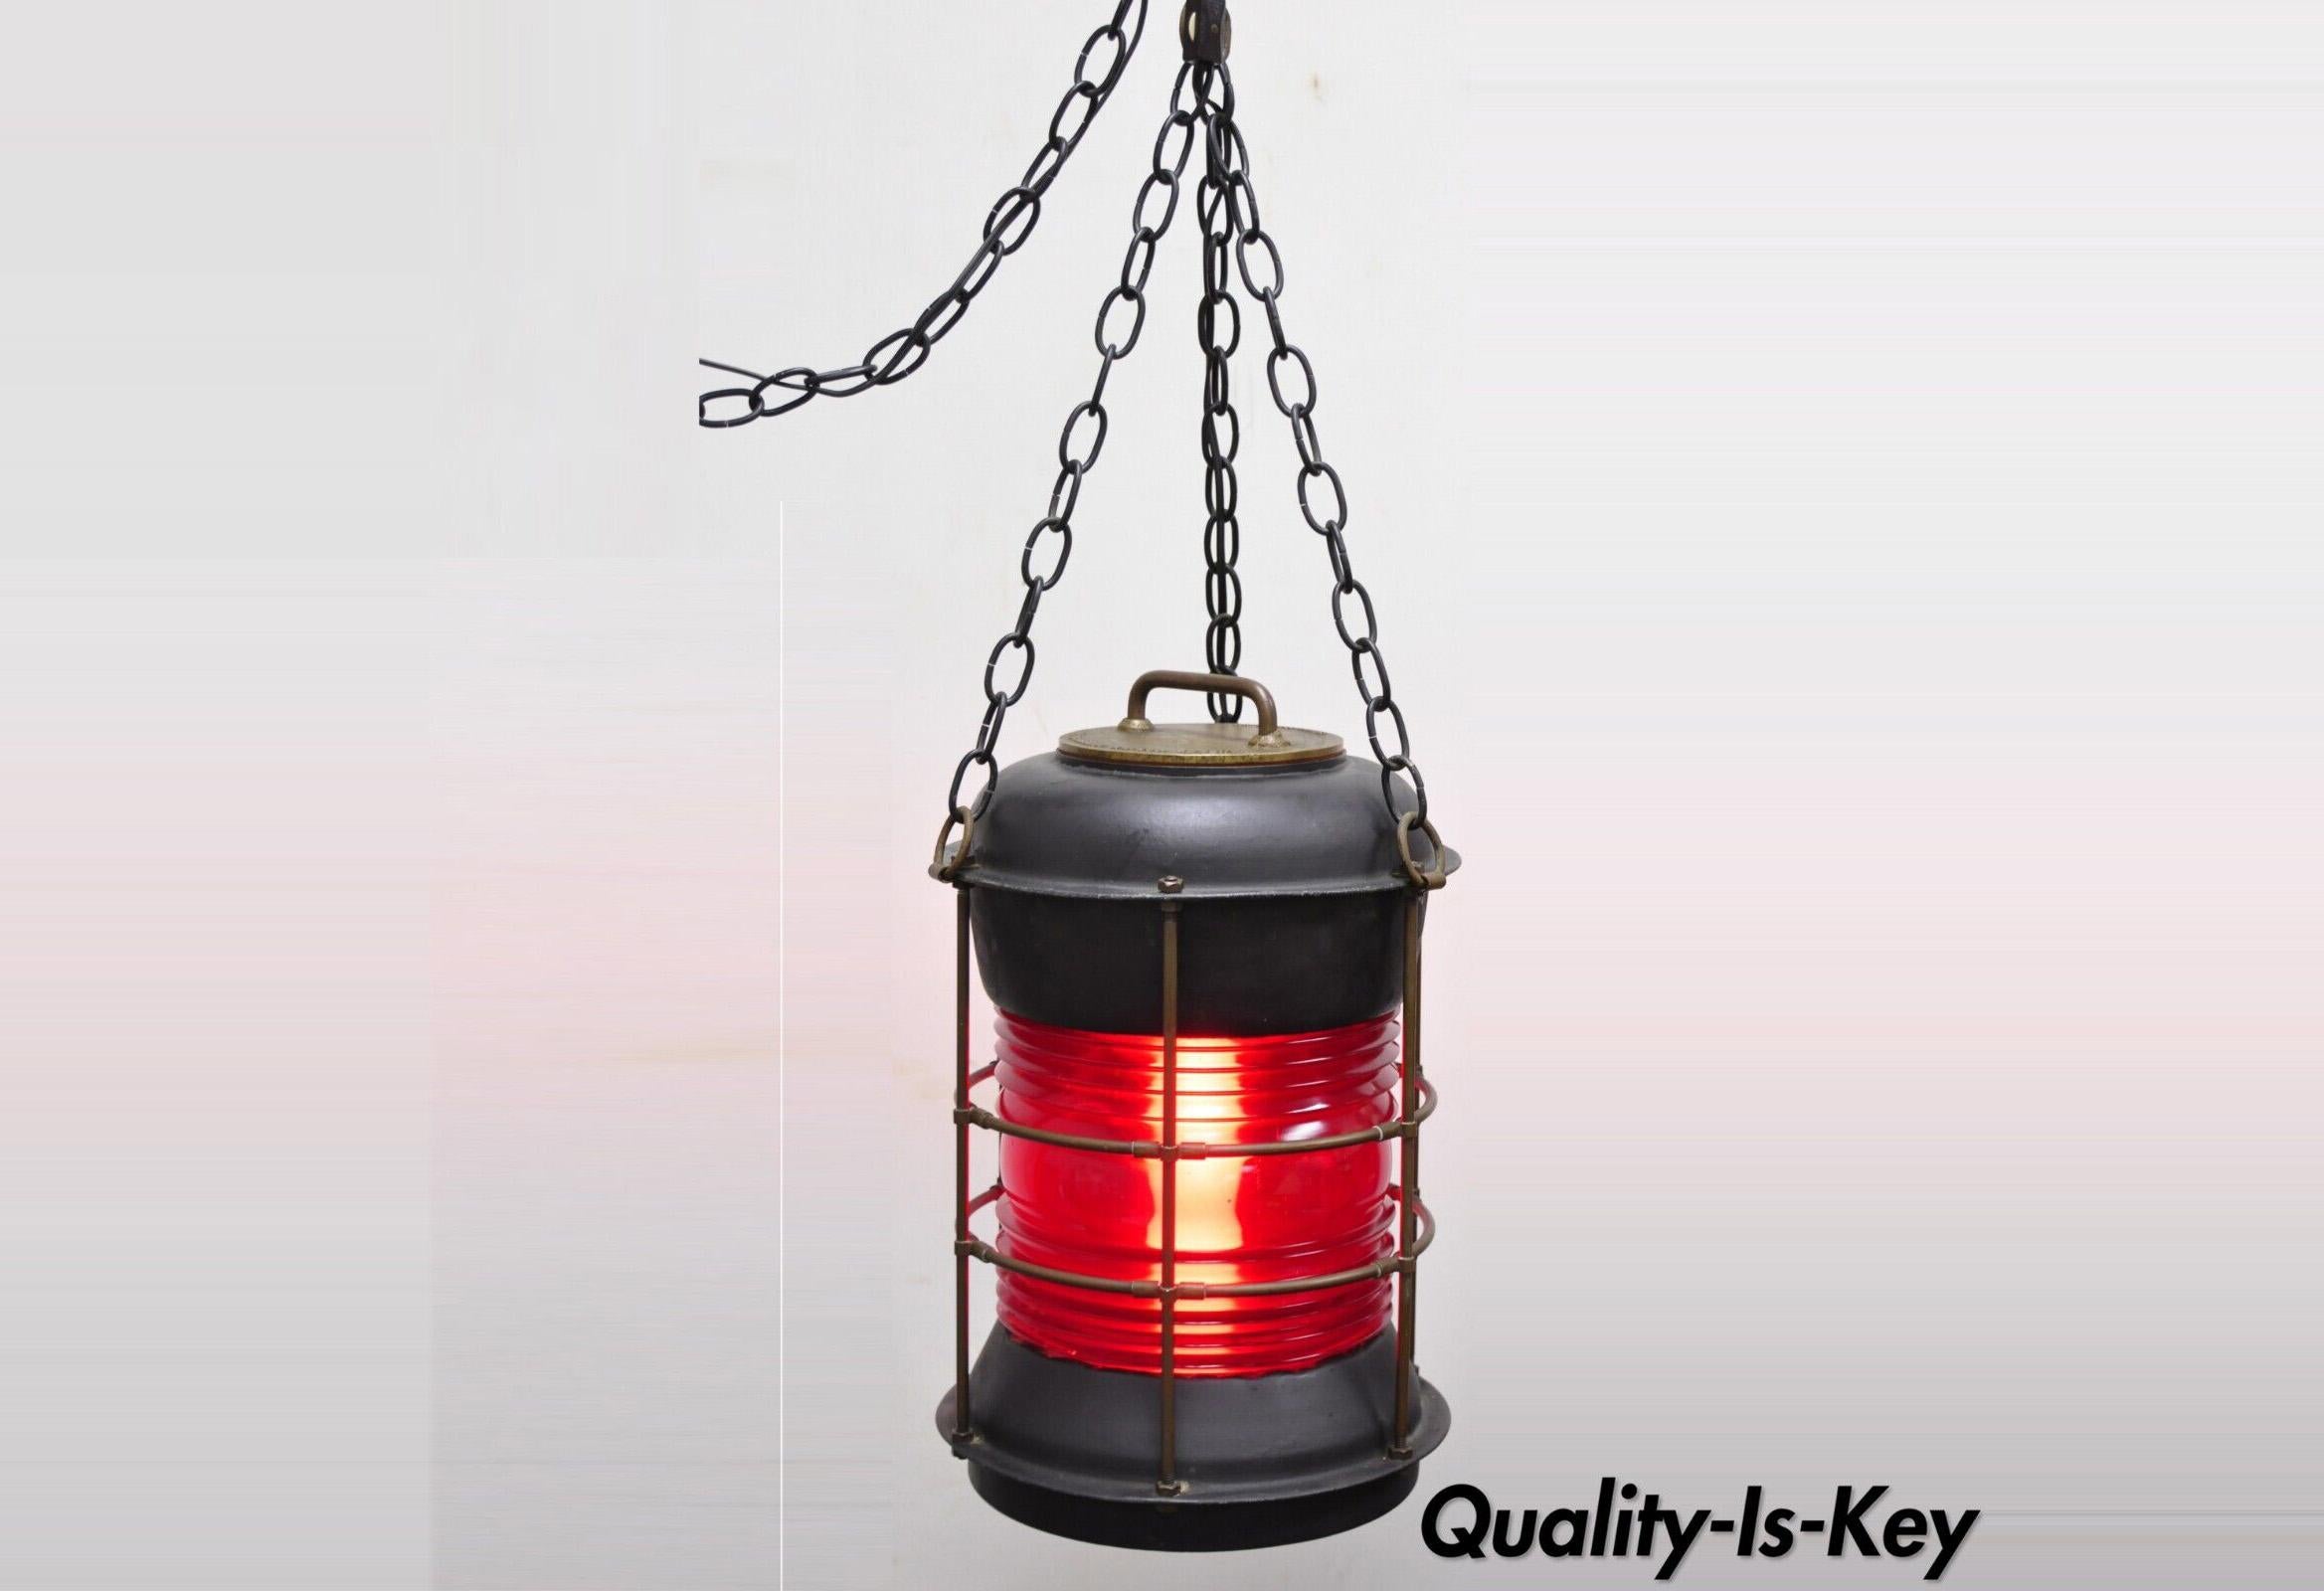 Antique Durkee marine ship lantern fixture red fresnel pendant chandlier (A). Item features 360 degree red glass fresnel lens, steel metal frame, original label, very nice antique item, quality American craftsmanship, converted into a functioning